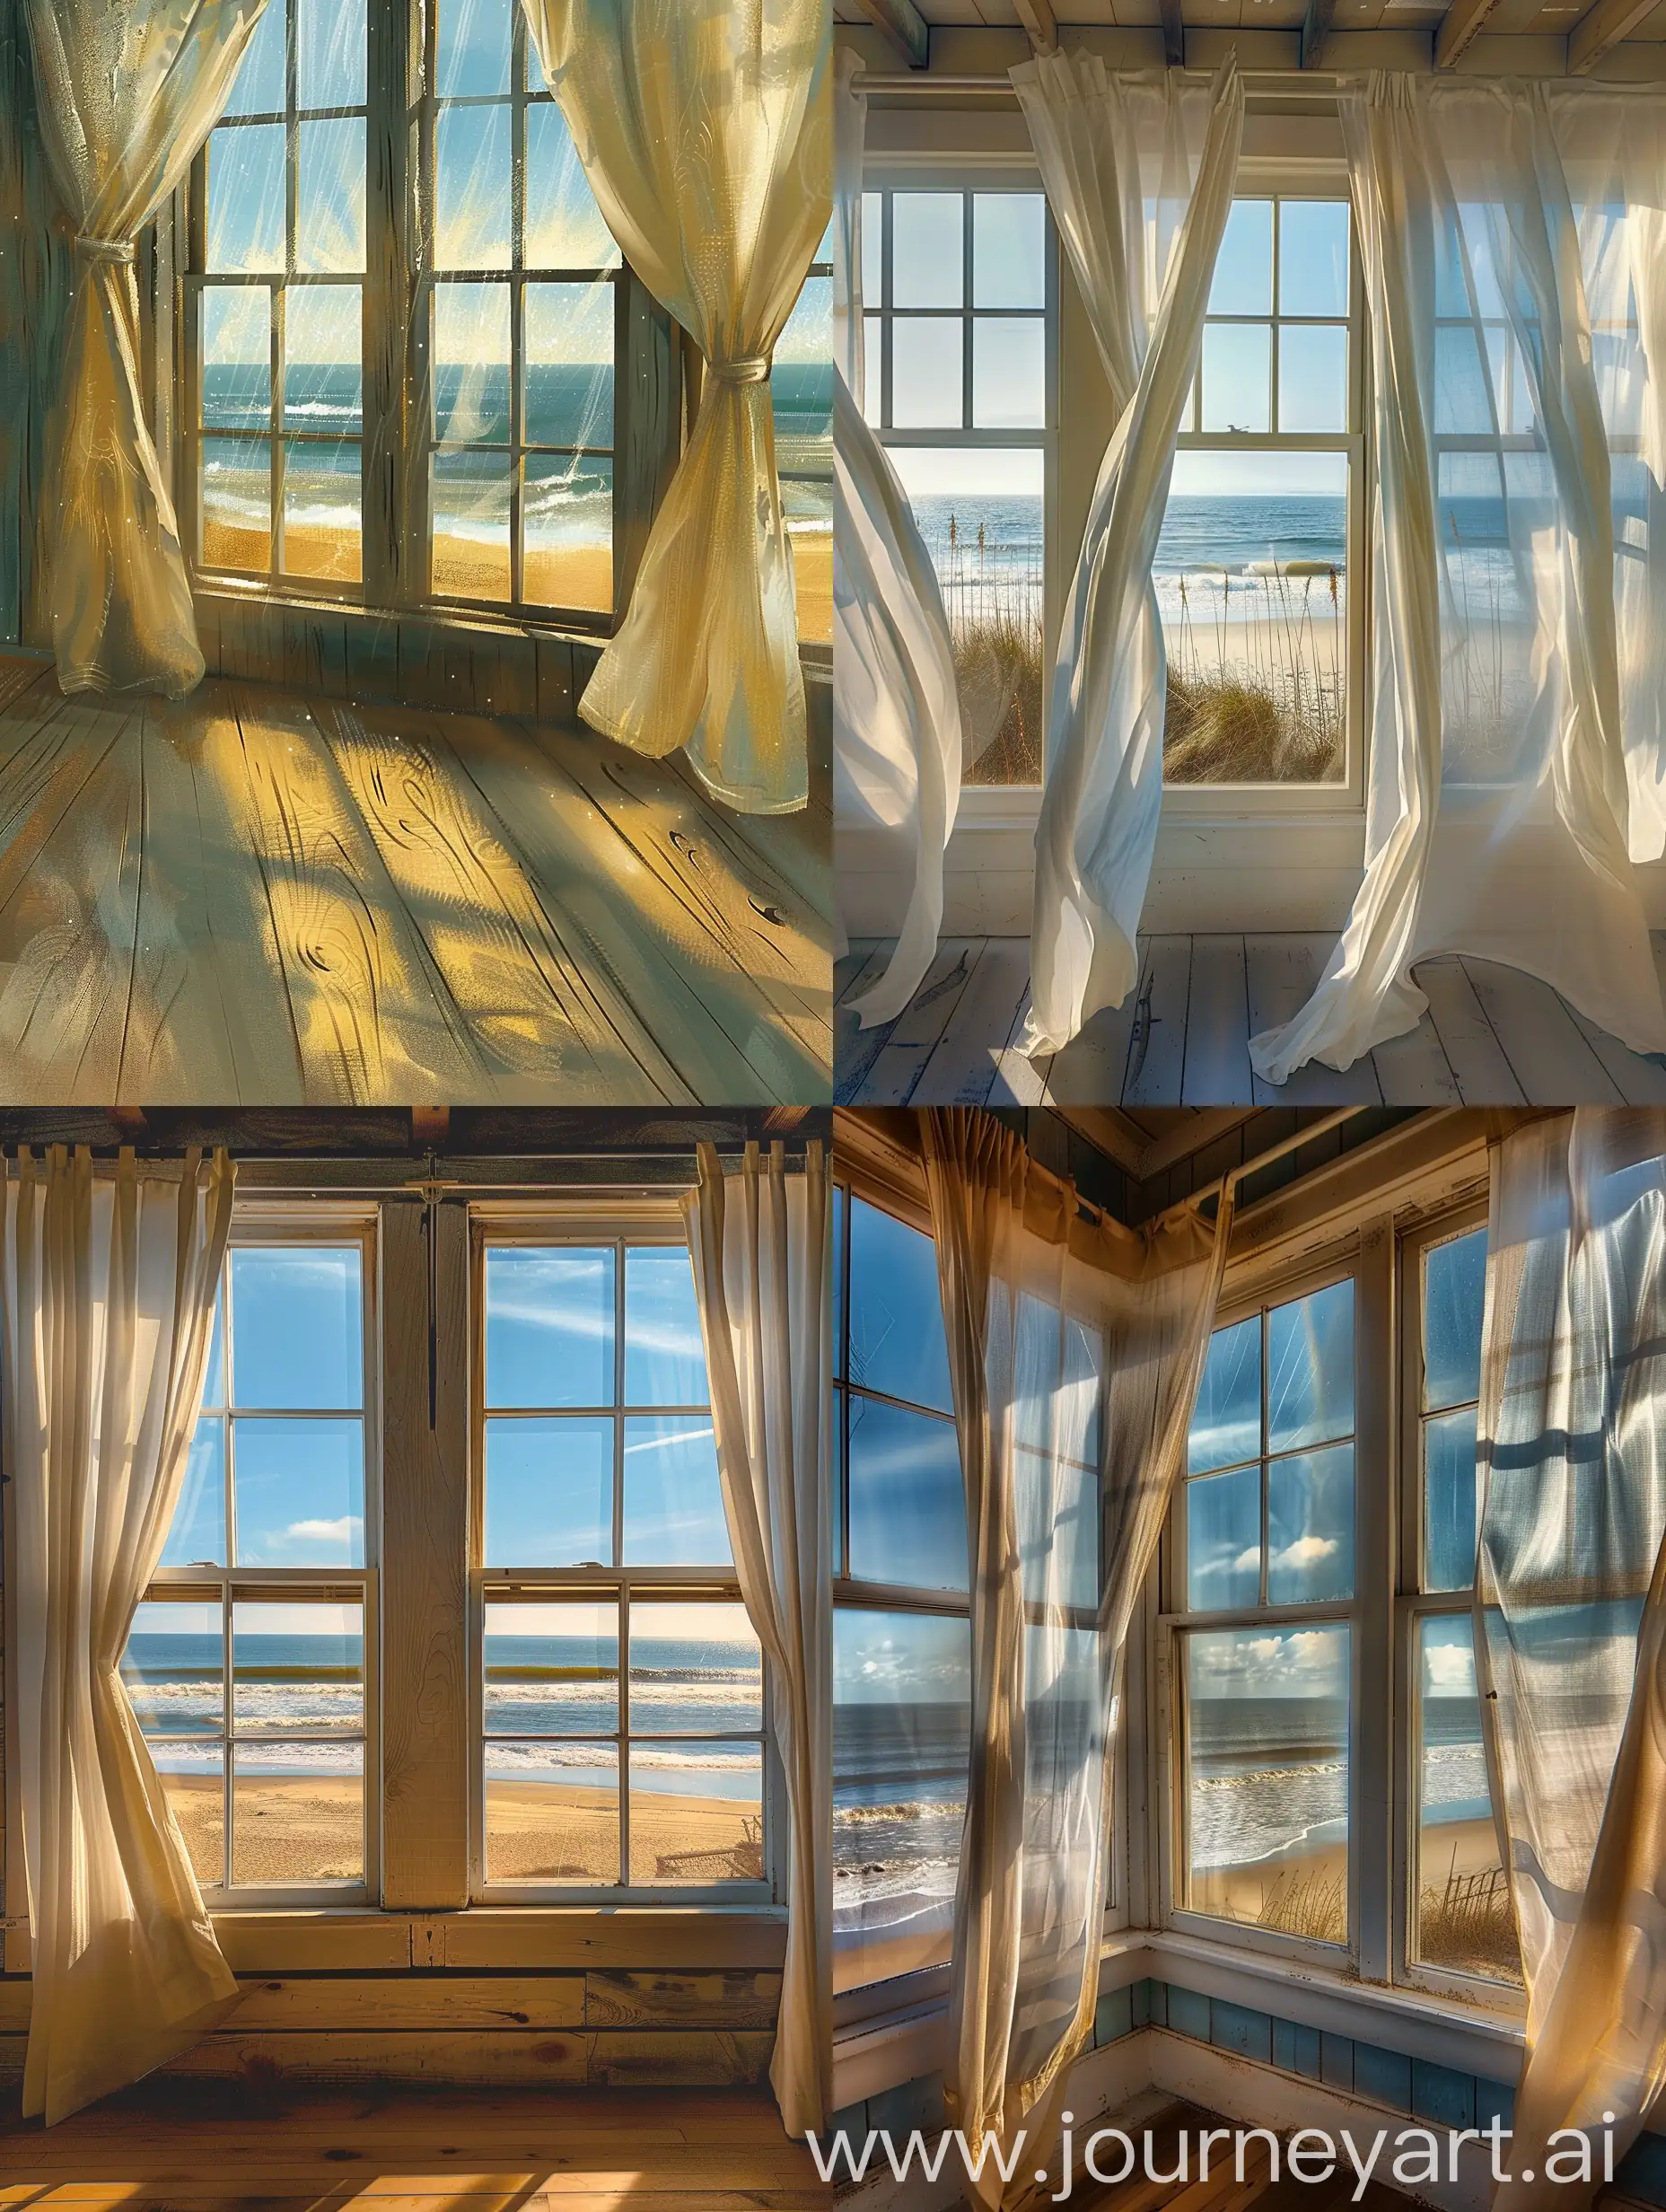 Inside the cozy seaside cottage, a serene retreat awaits. Through the windows, a breathtaking panorama unfolds, revealing the vast expanse of the ocean and the golden stretch of sand that kisses its shores. The rhythmic symphony of crashing waves fills the air, as the salty sea breeze dances through the room, causing the curtains to sway gracefully in its embrace. The gentle caress of the wind carries with it the invigorating scent of the sea, mingling with the warmth and comfort of the cottage. With each gust, the curtains create a mesmerizing display, casting playful shadows and allowing slivers of sunlight to filter into the room. The tranquil ambiance invites a sense of tranquility and peace, as if time stands still in this seaside sanctuary. It is a place where one can immerse oneself in the beauty of nature, finding solace in the harmonious union of land, sea, and sky.